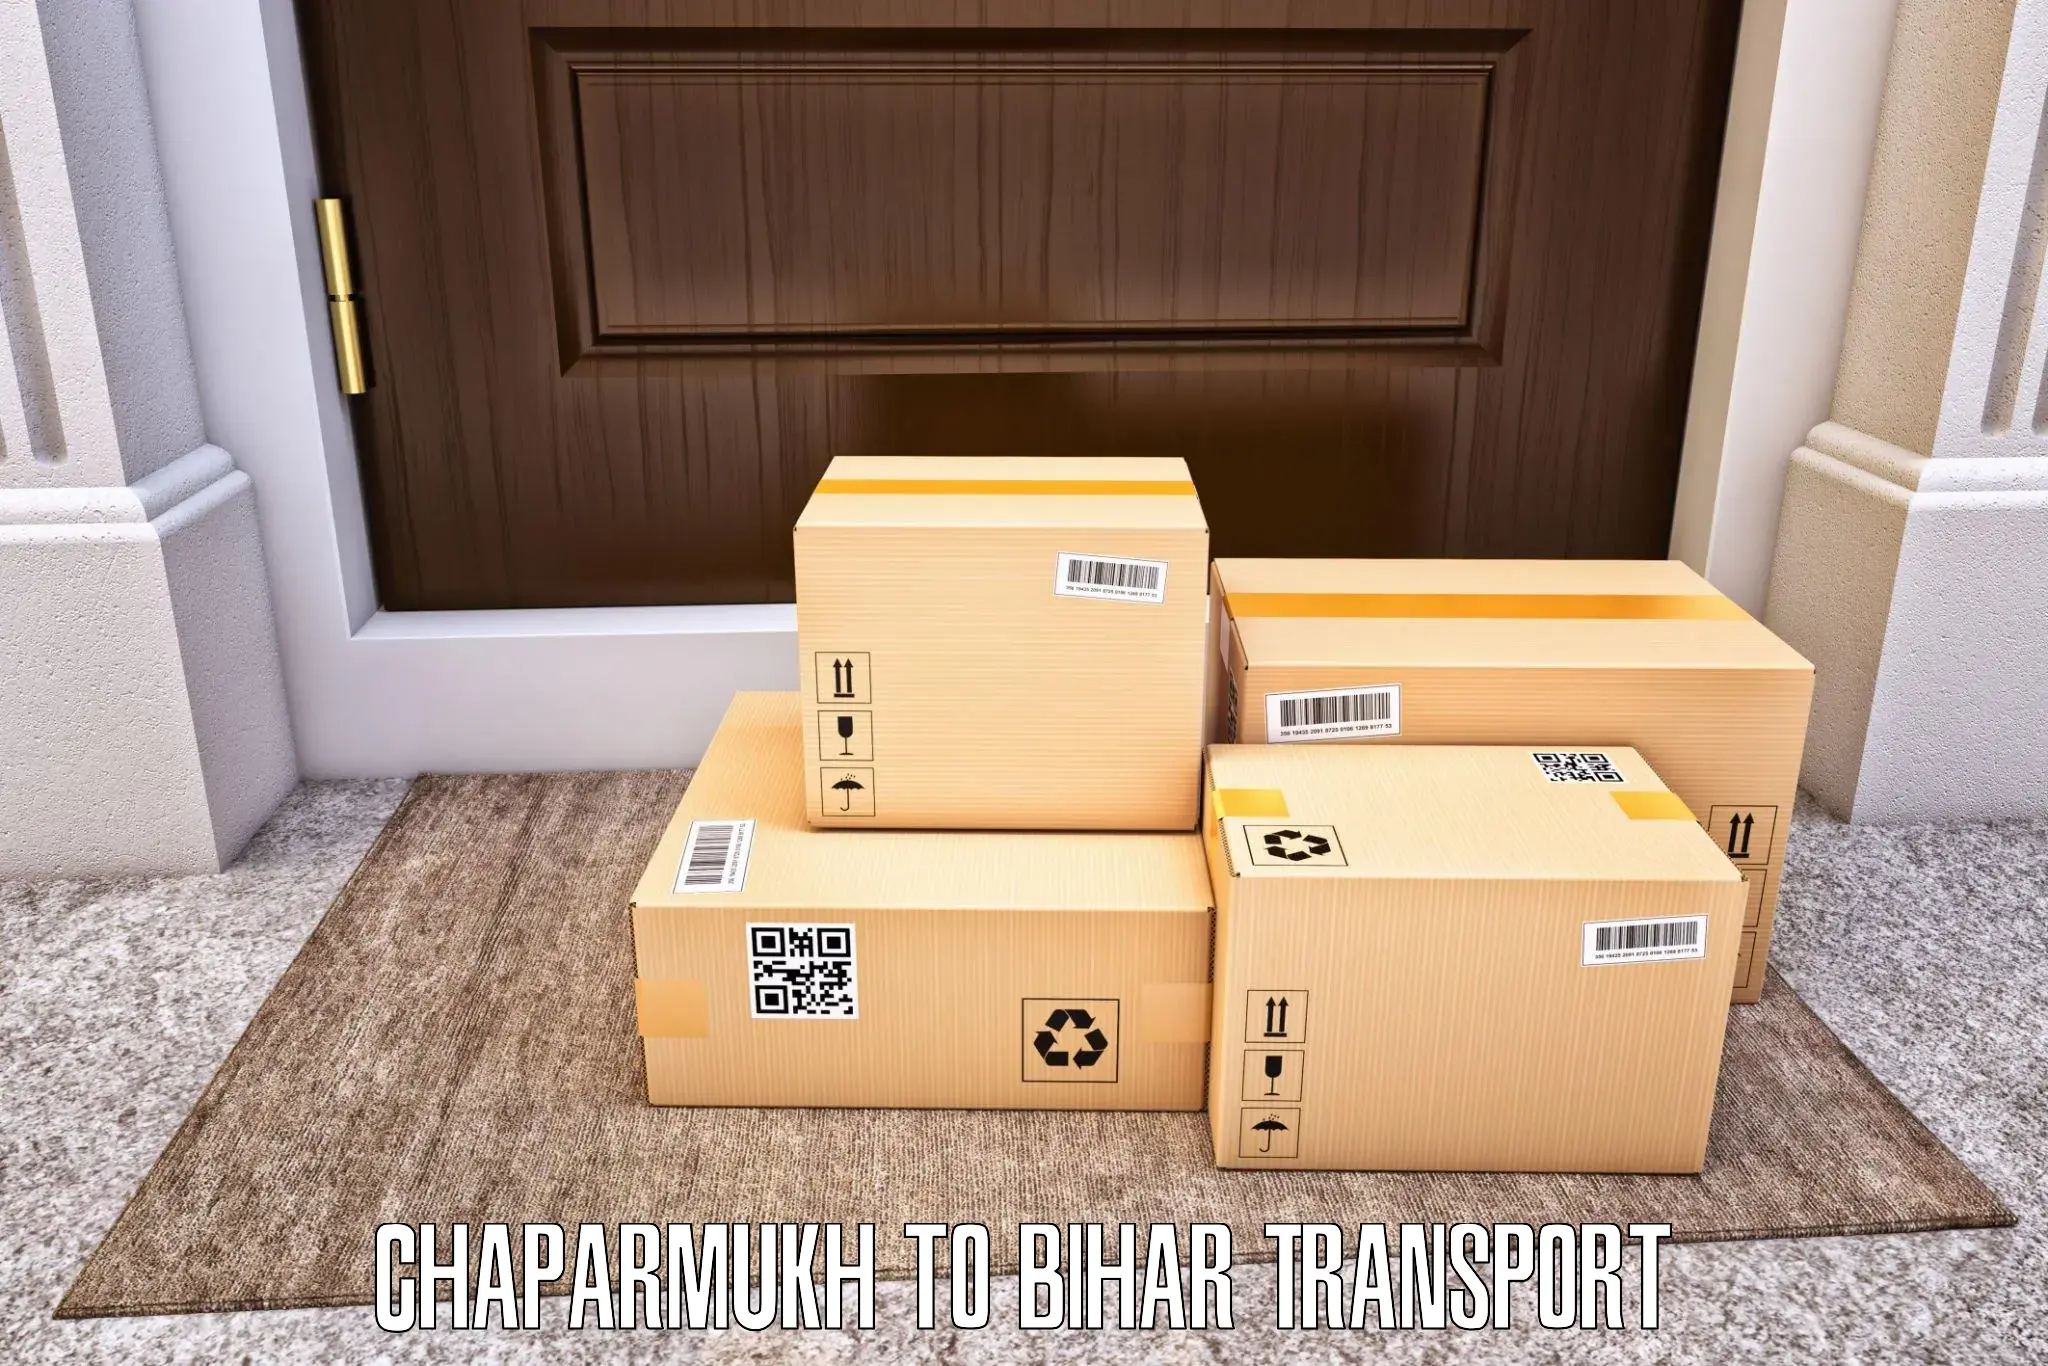 Cargo transportation services in Chaparmukh to Darbhanga